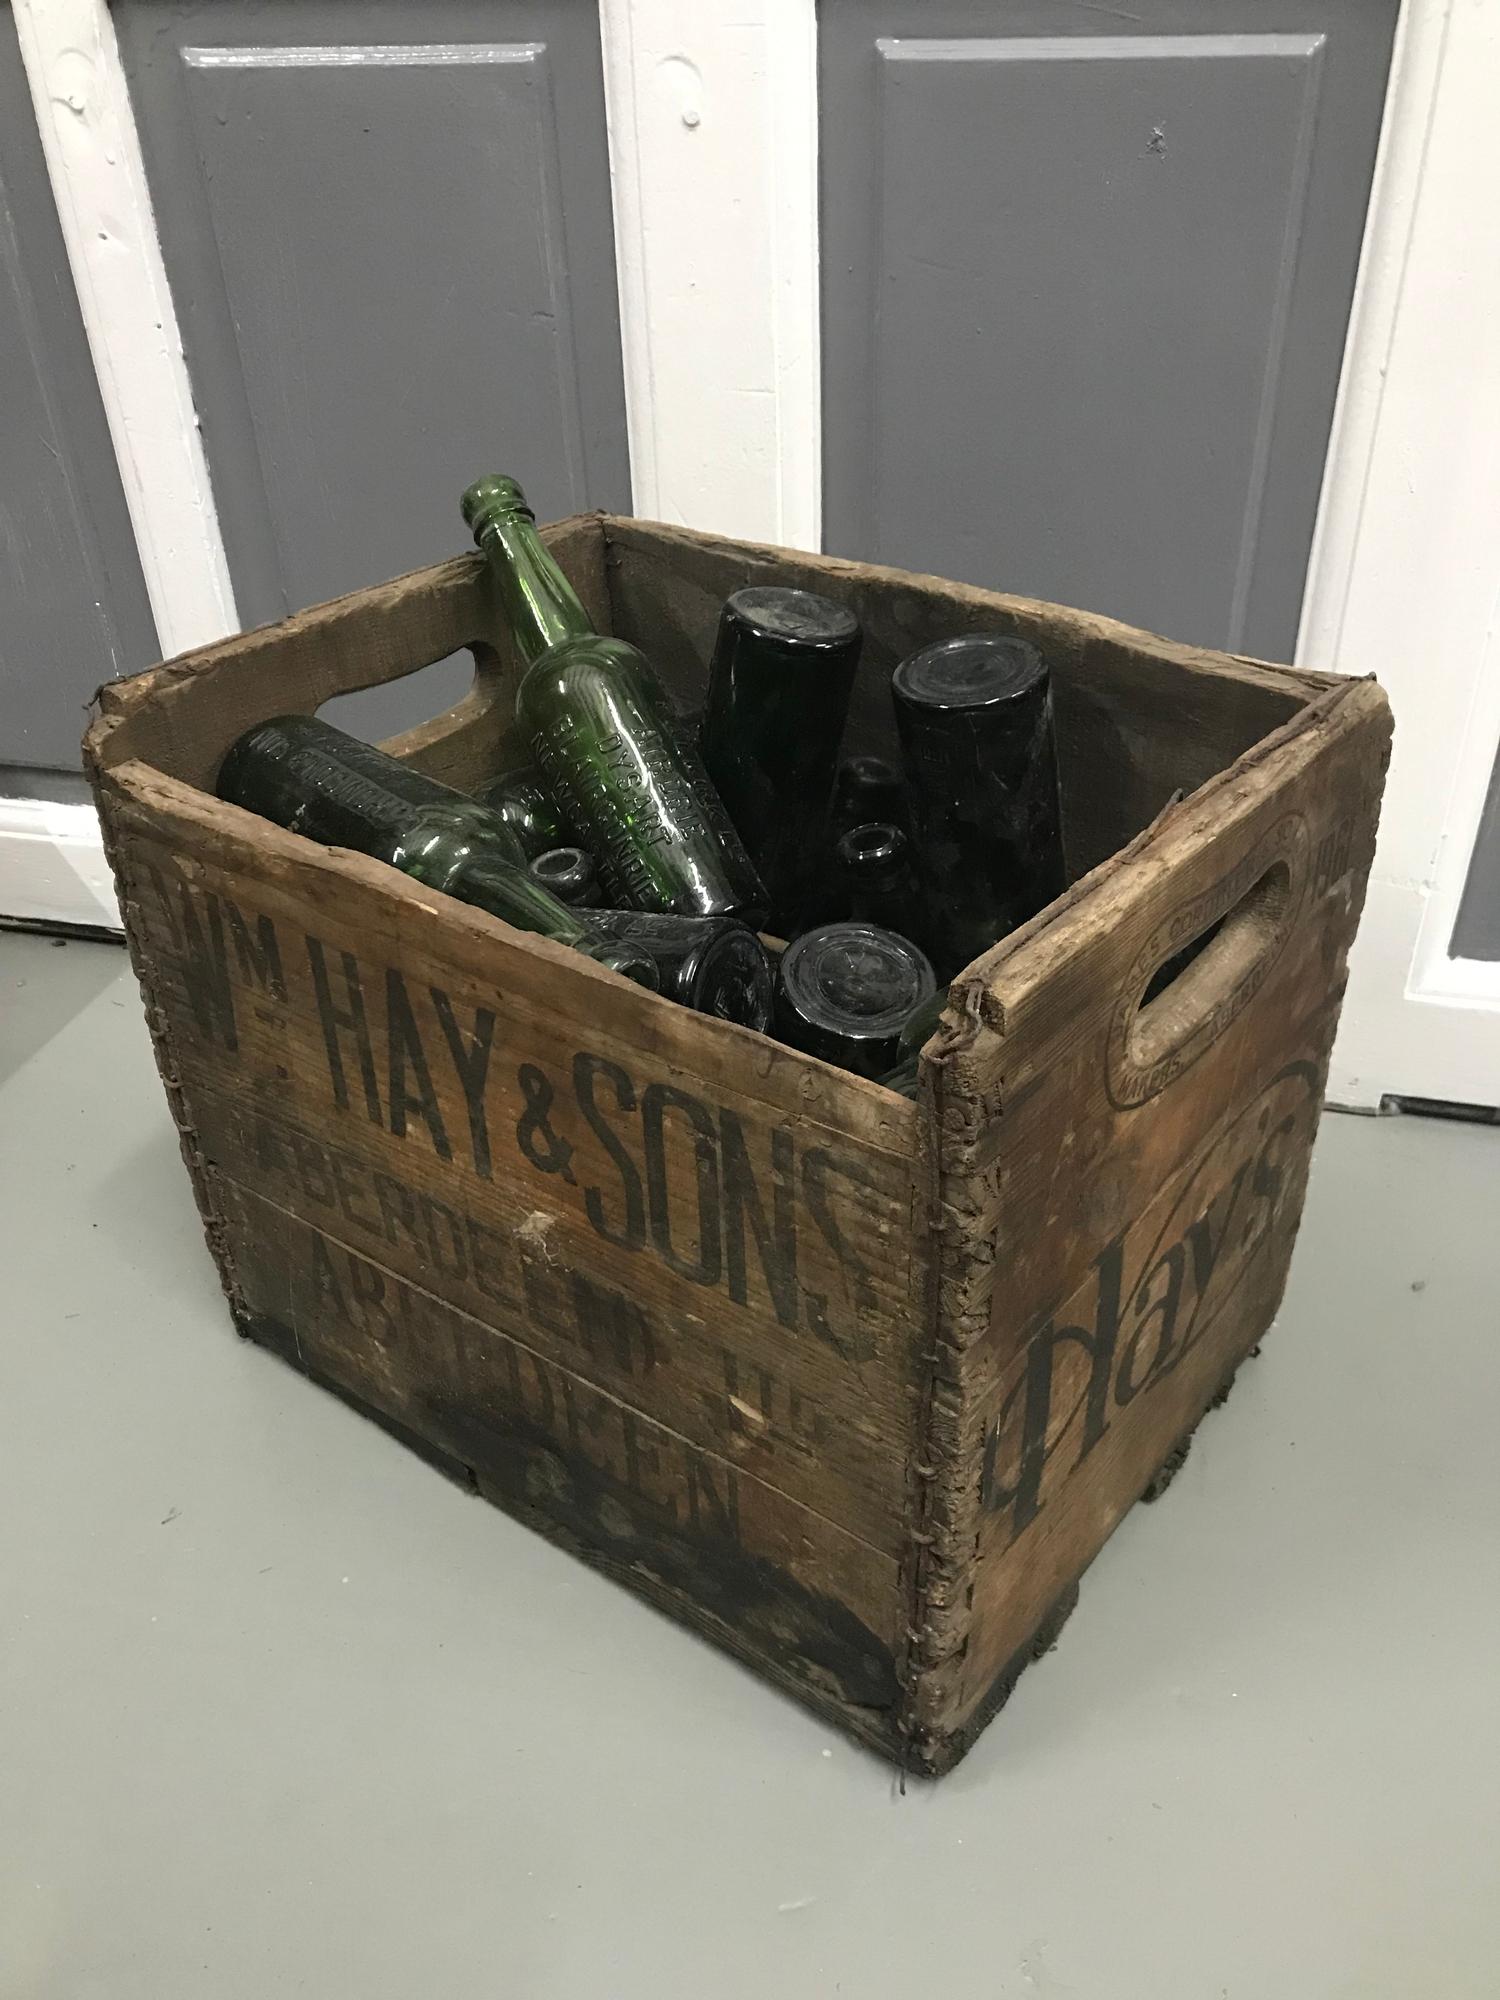 A Vintage wooden crate advertising William Hay & Sons Aberdeen Ltd, Together with a collection of